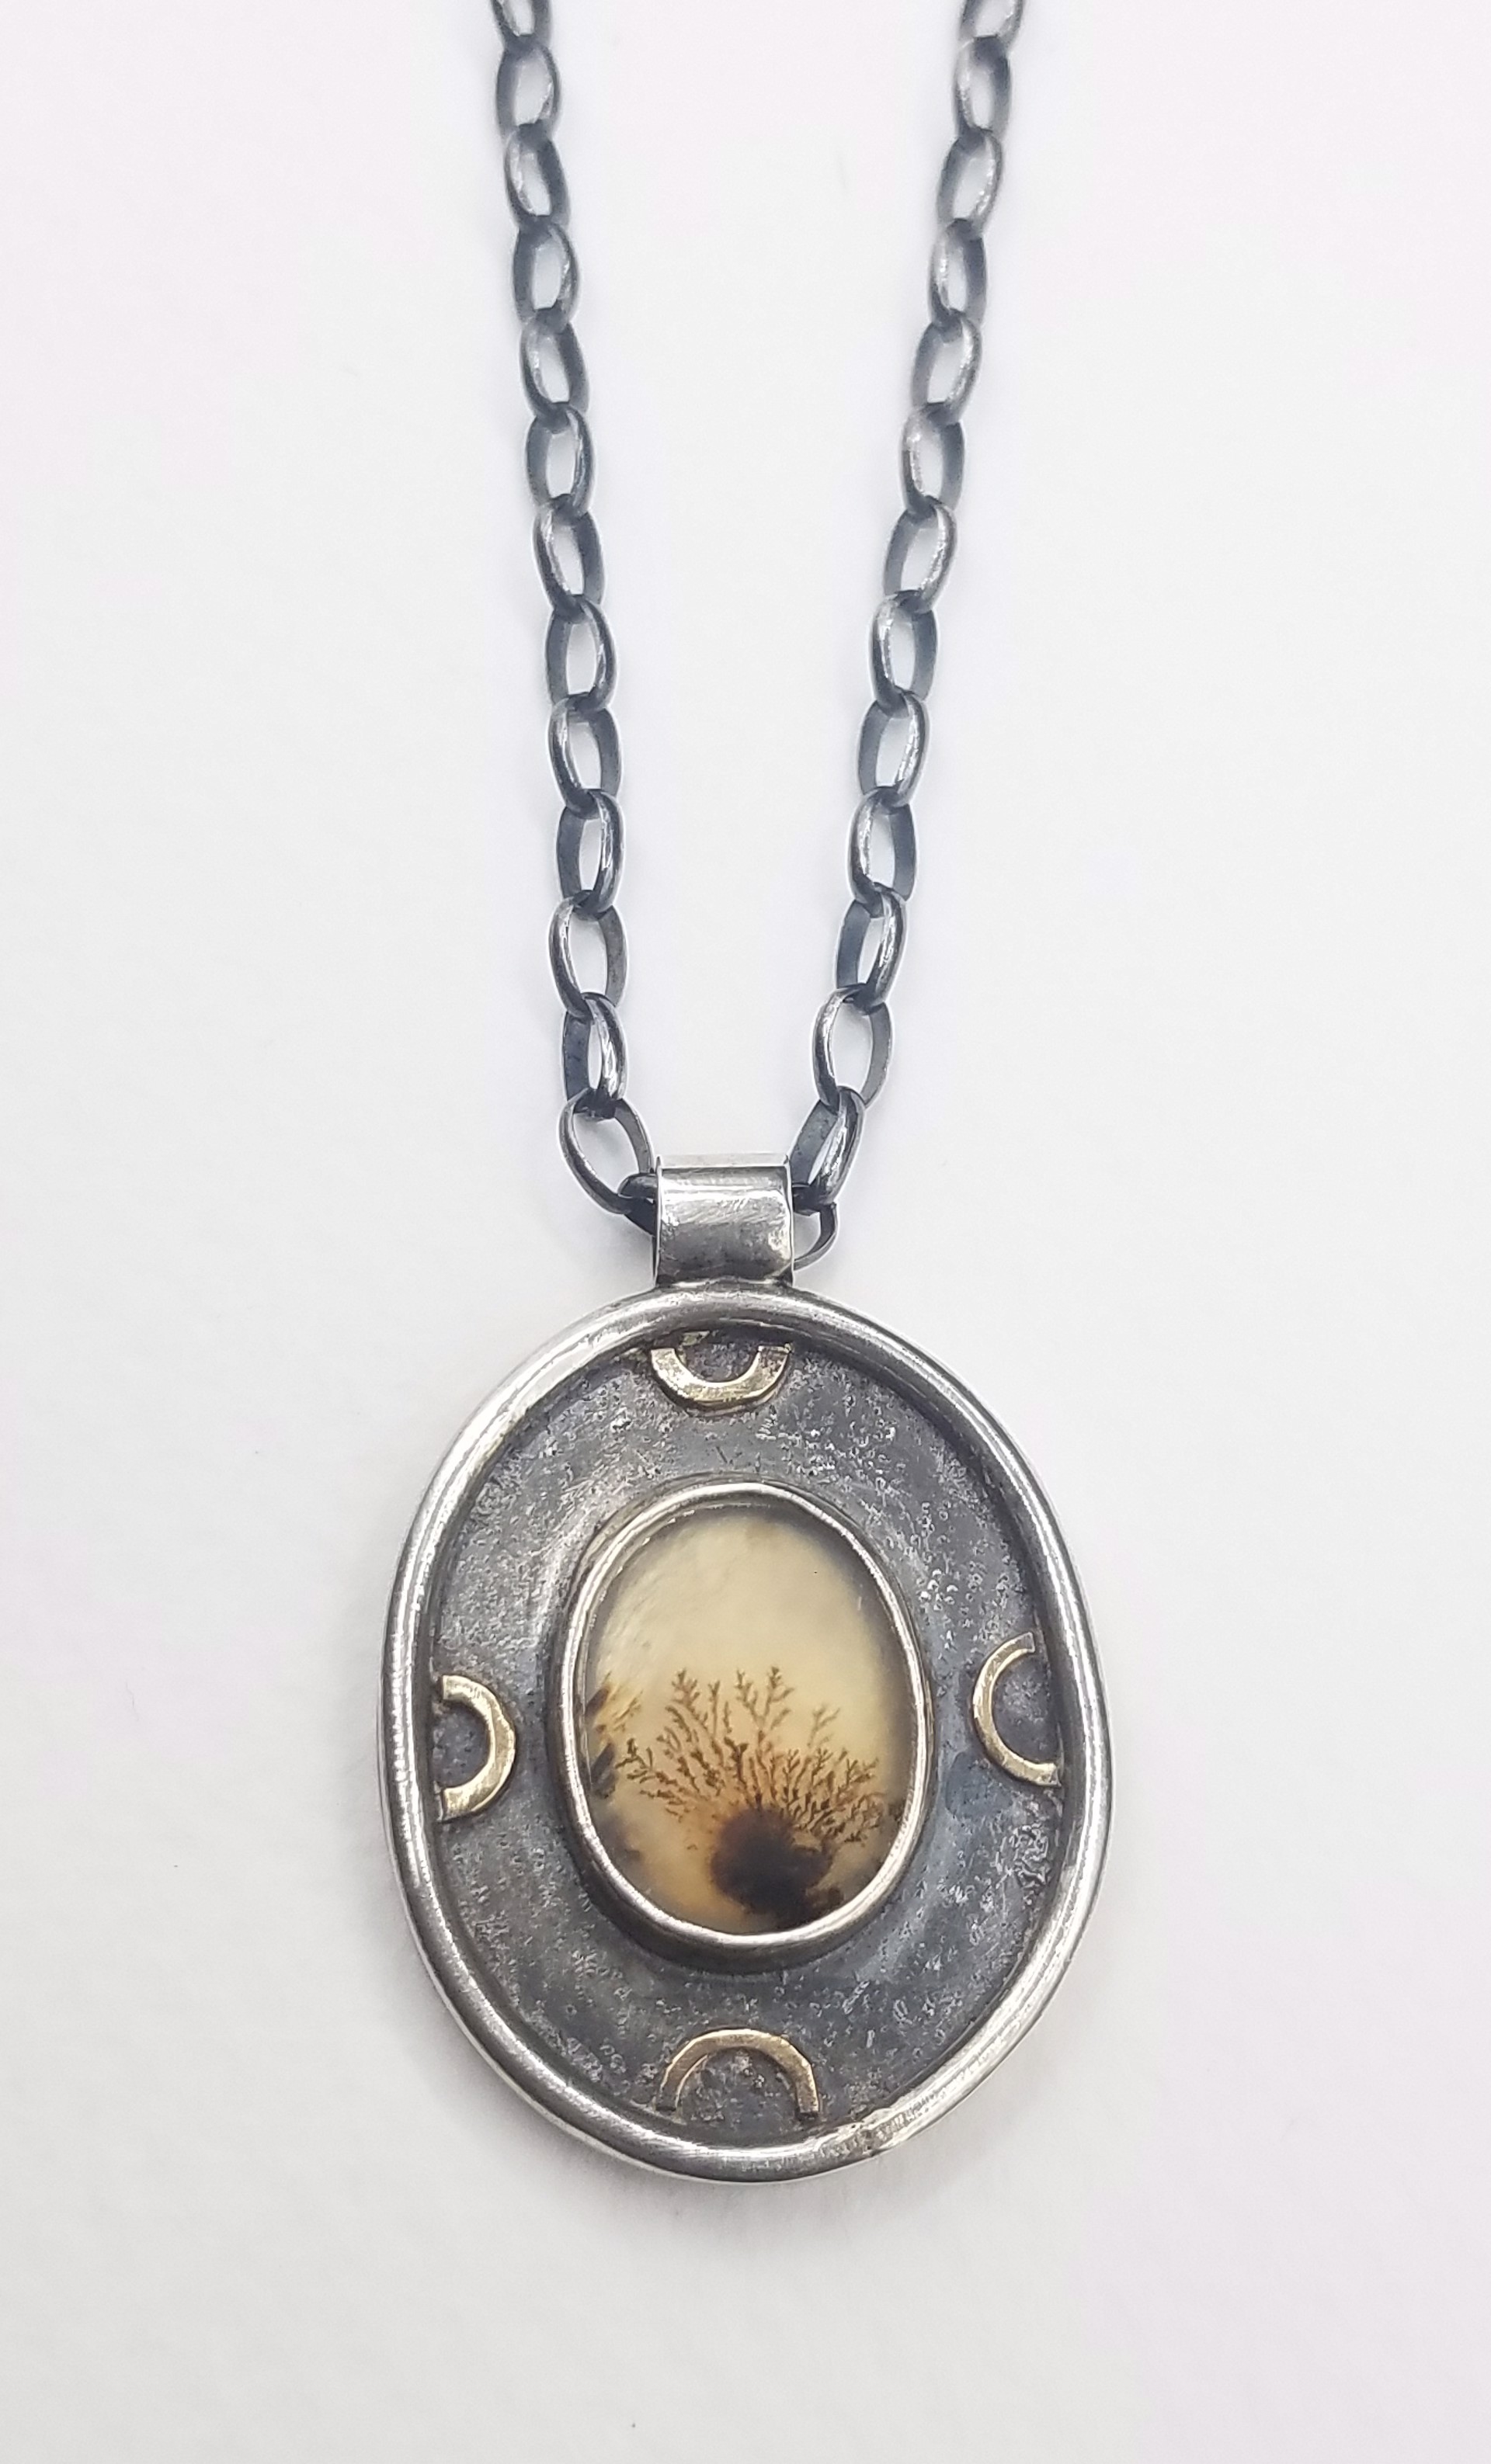 Dendritic Agate Necklace by Anita Shuler